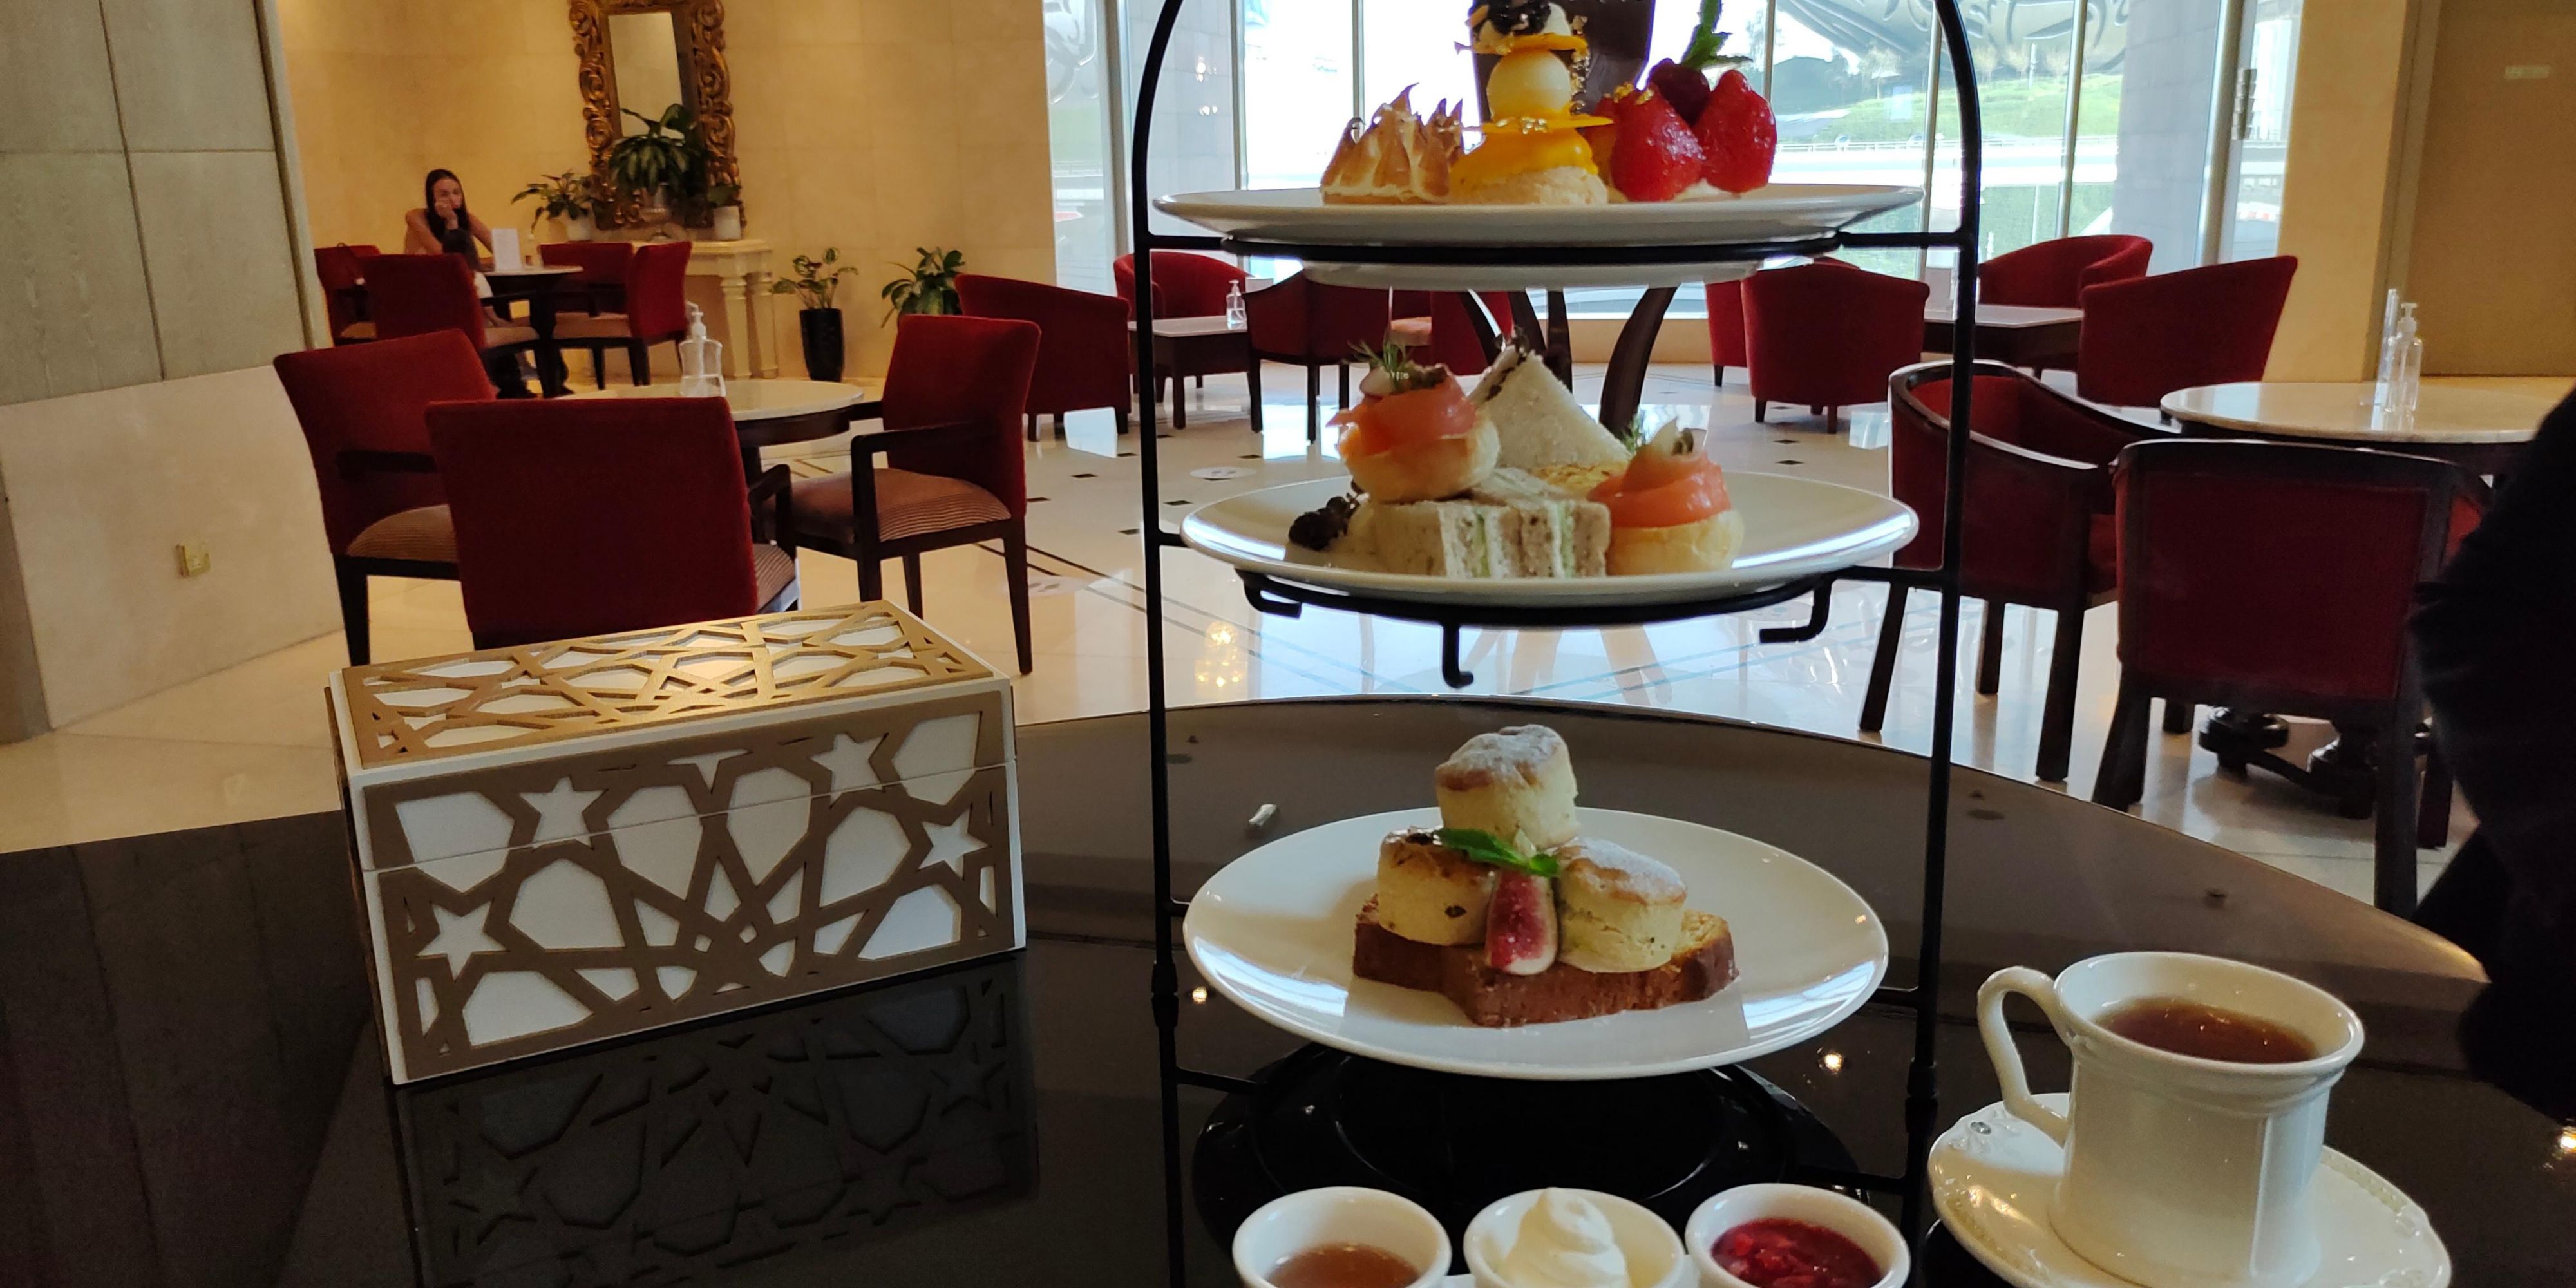 Enjoy the afternoon tea with a great view at Cappuccino's